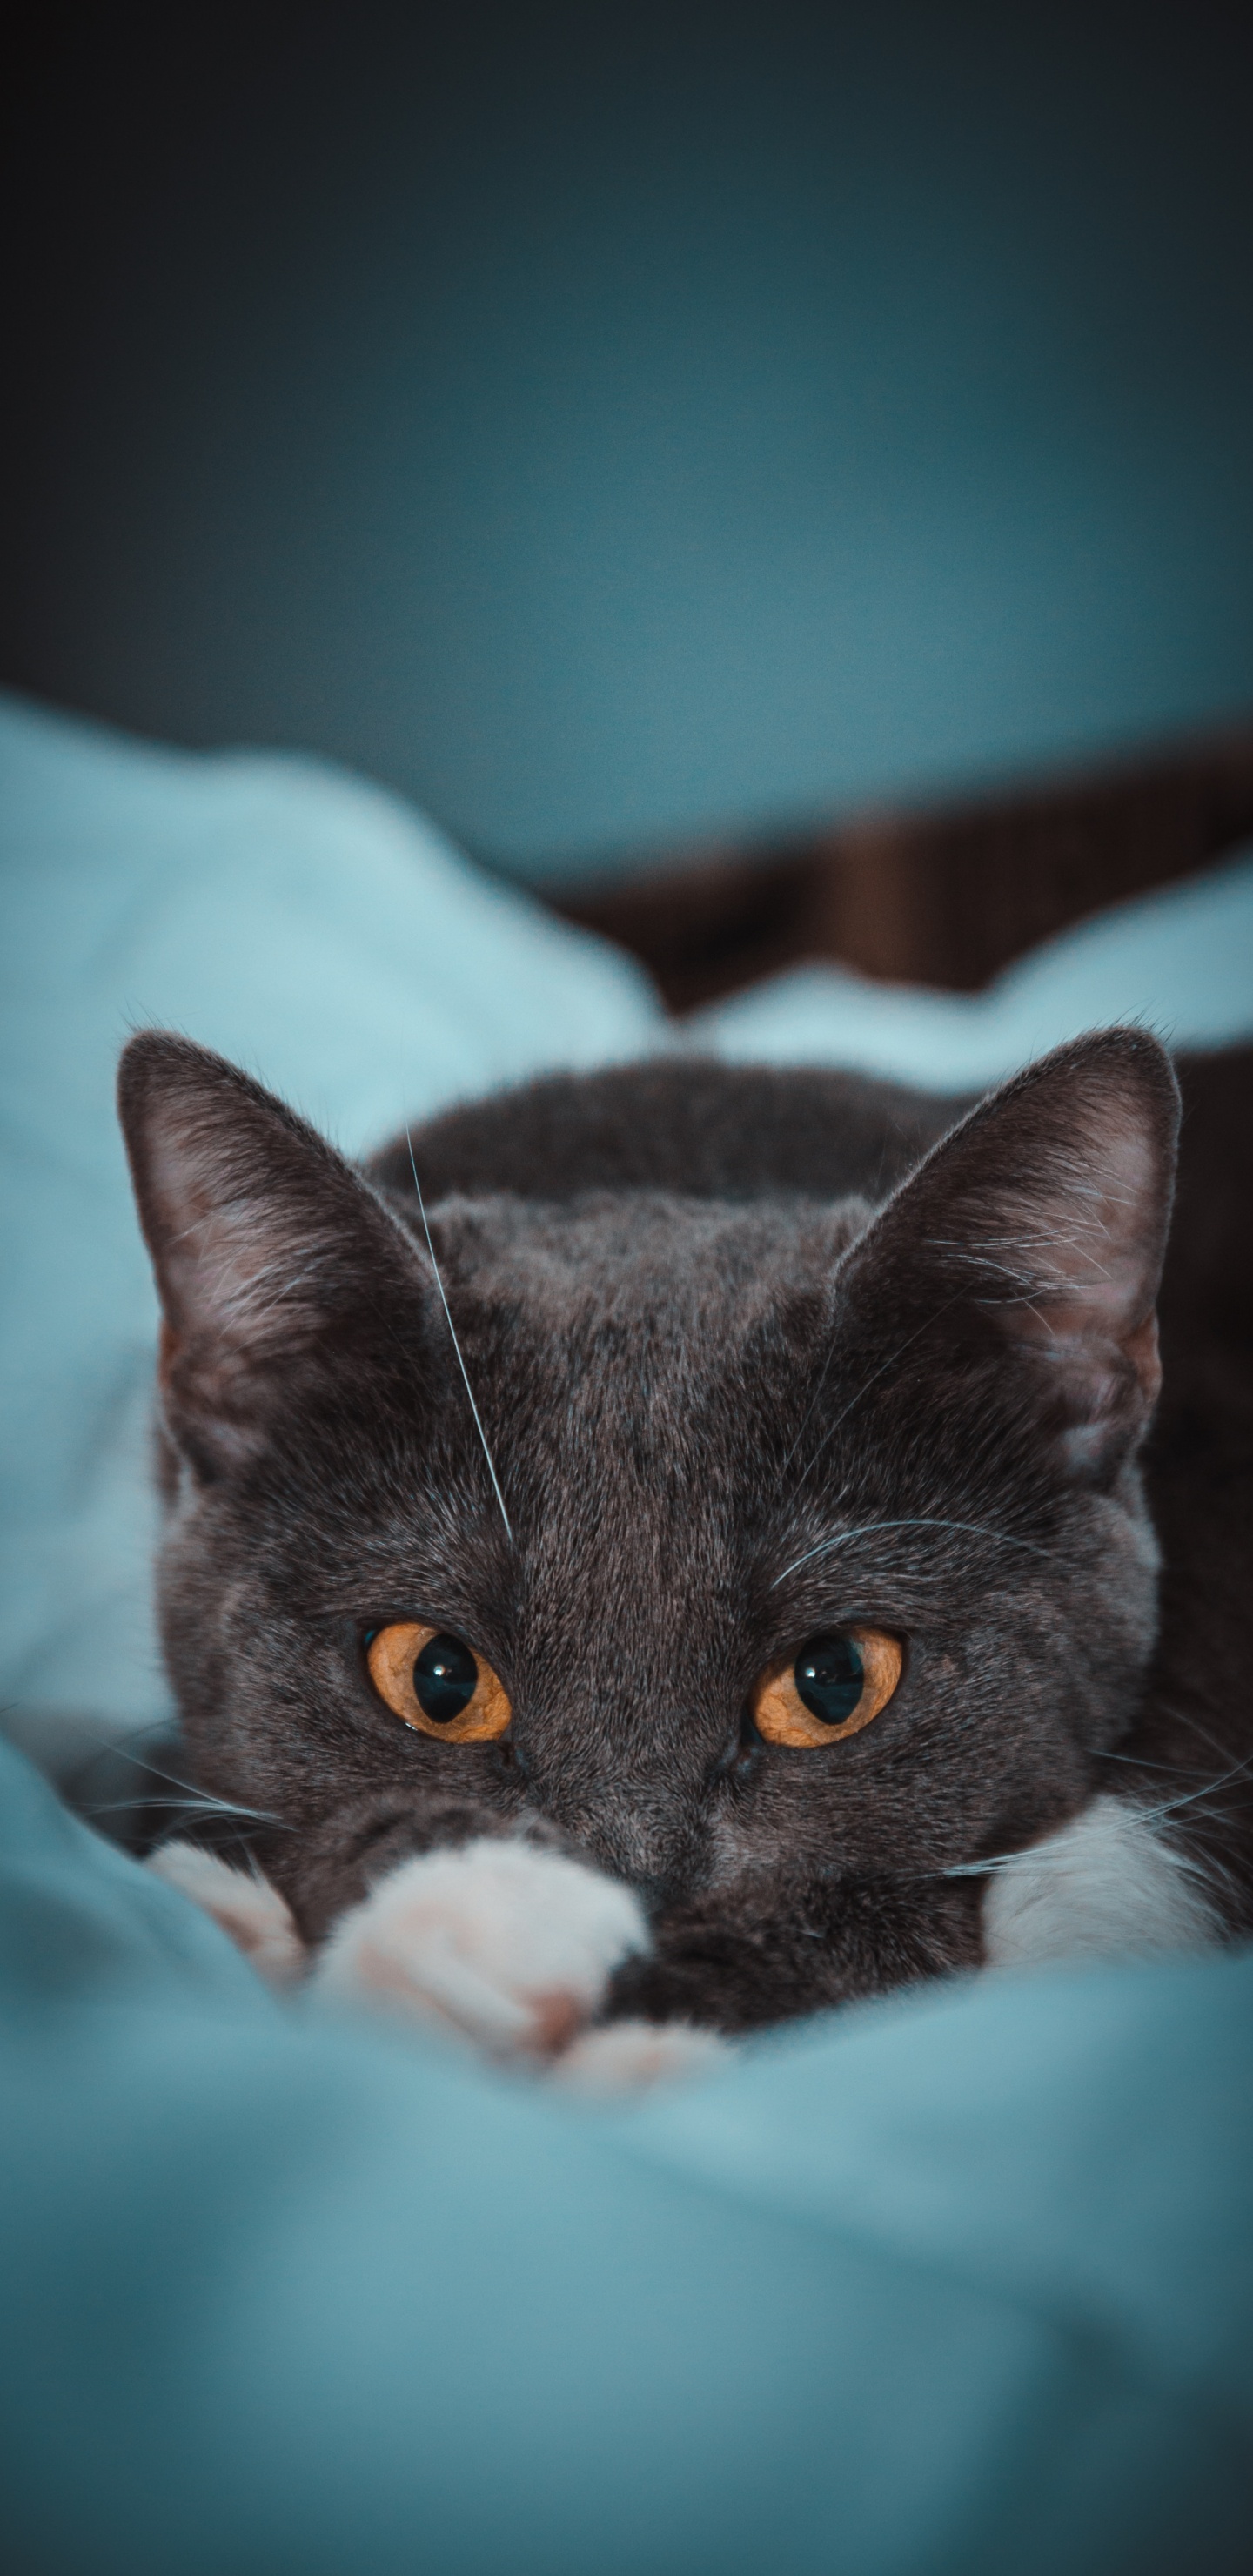 Black and White Cat on Teal Textile. Wallpaper in 1440x2960 Resolution